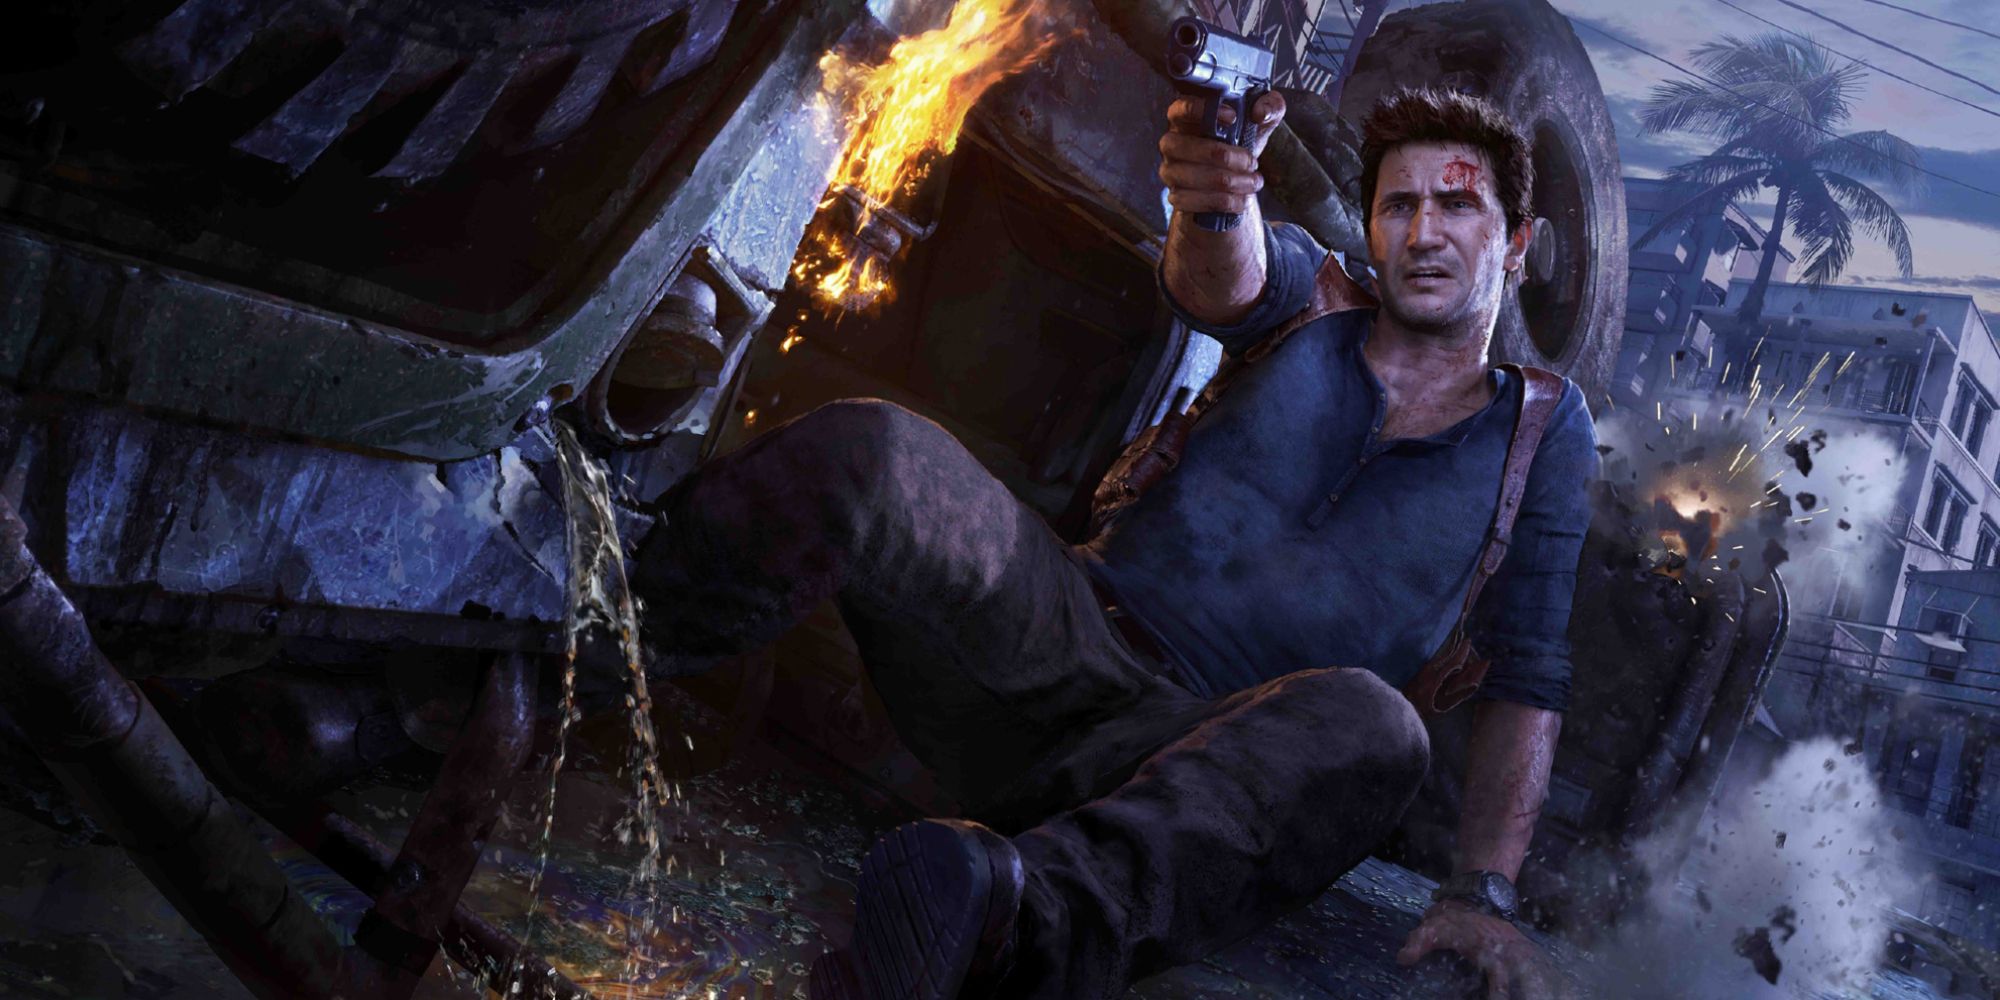 Uncharted Legacy Of Thieves HD Game Wallpapers